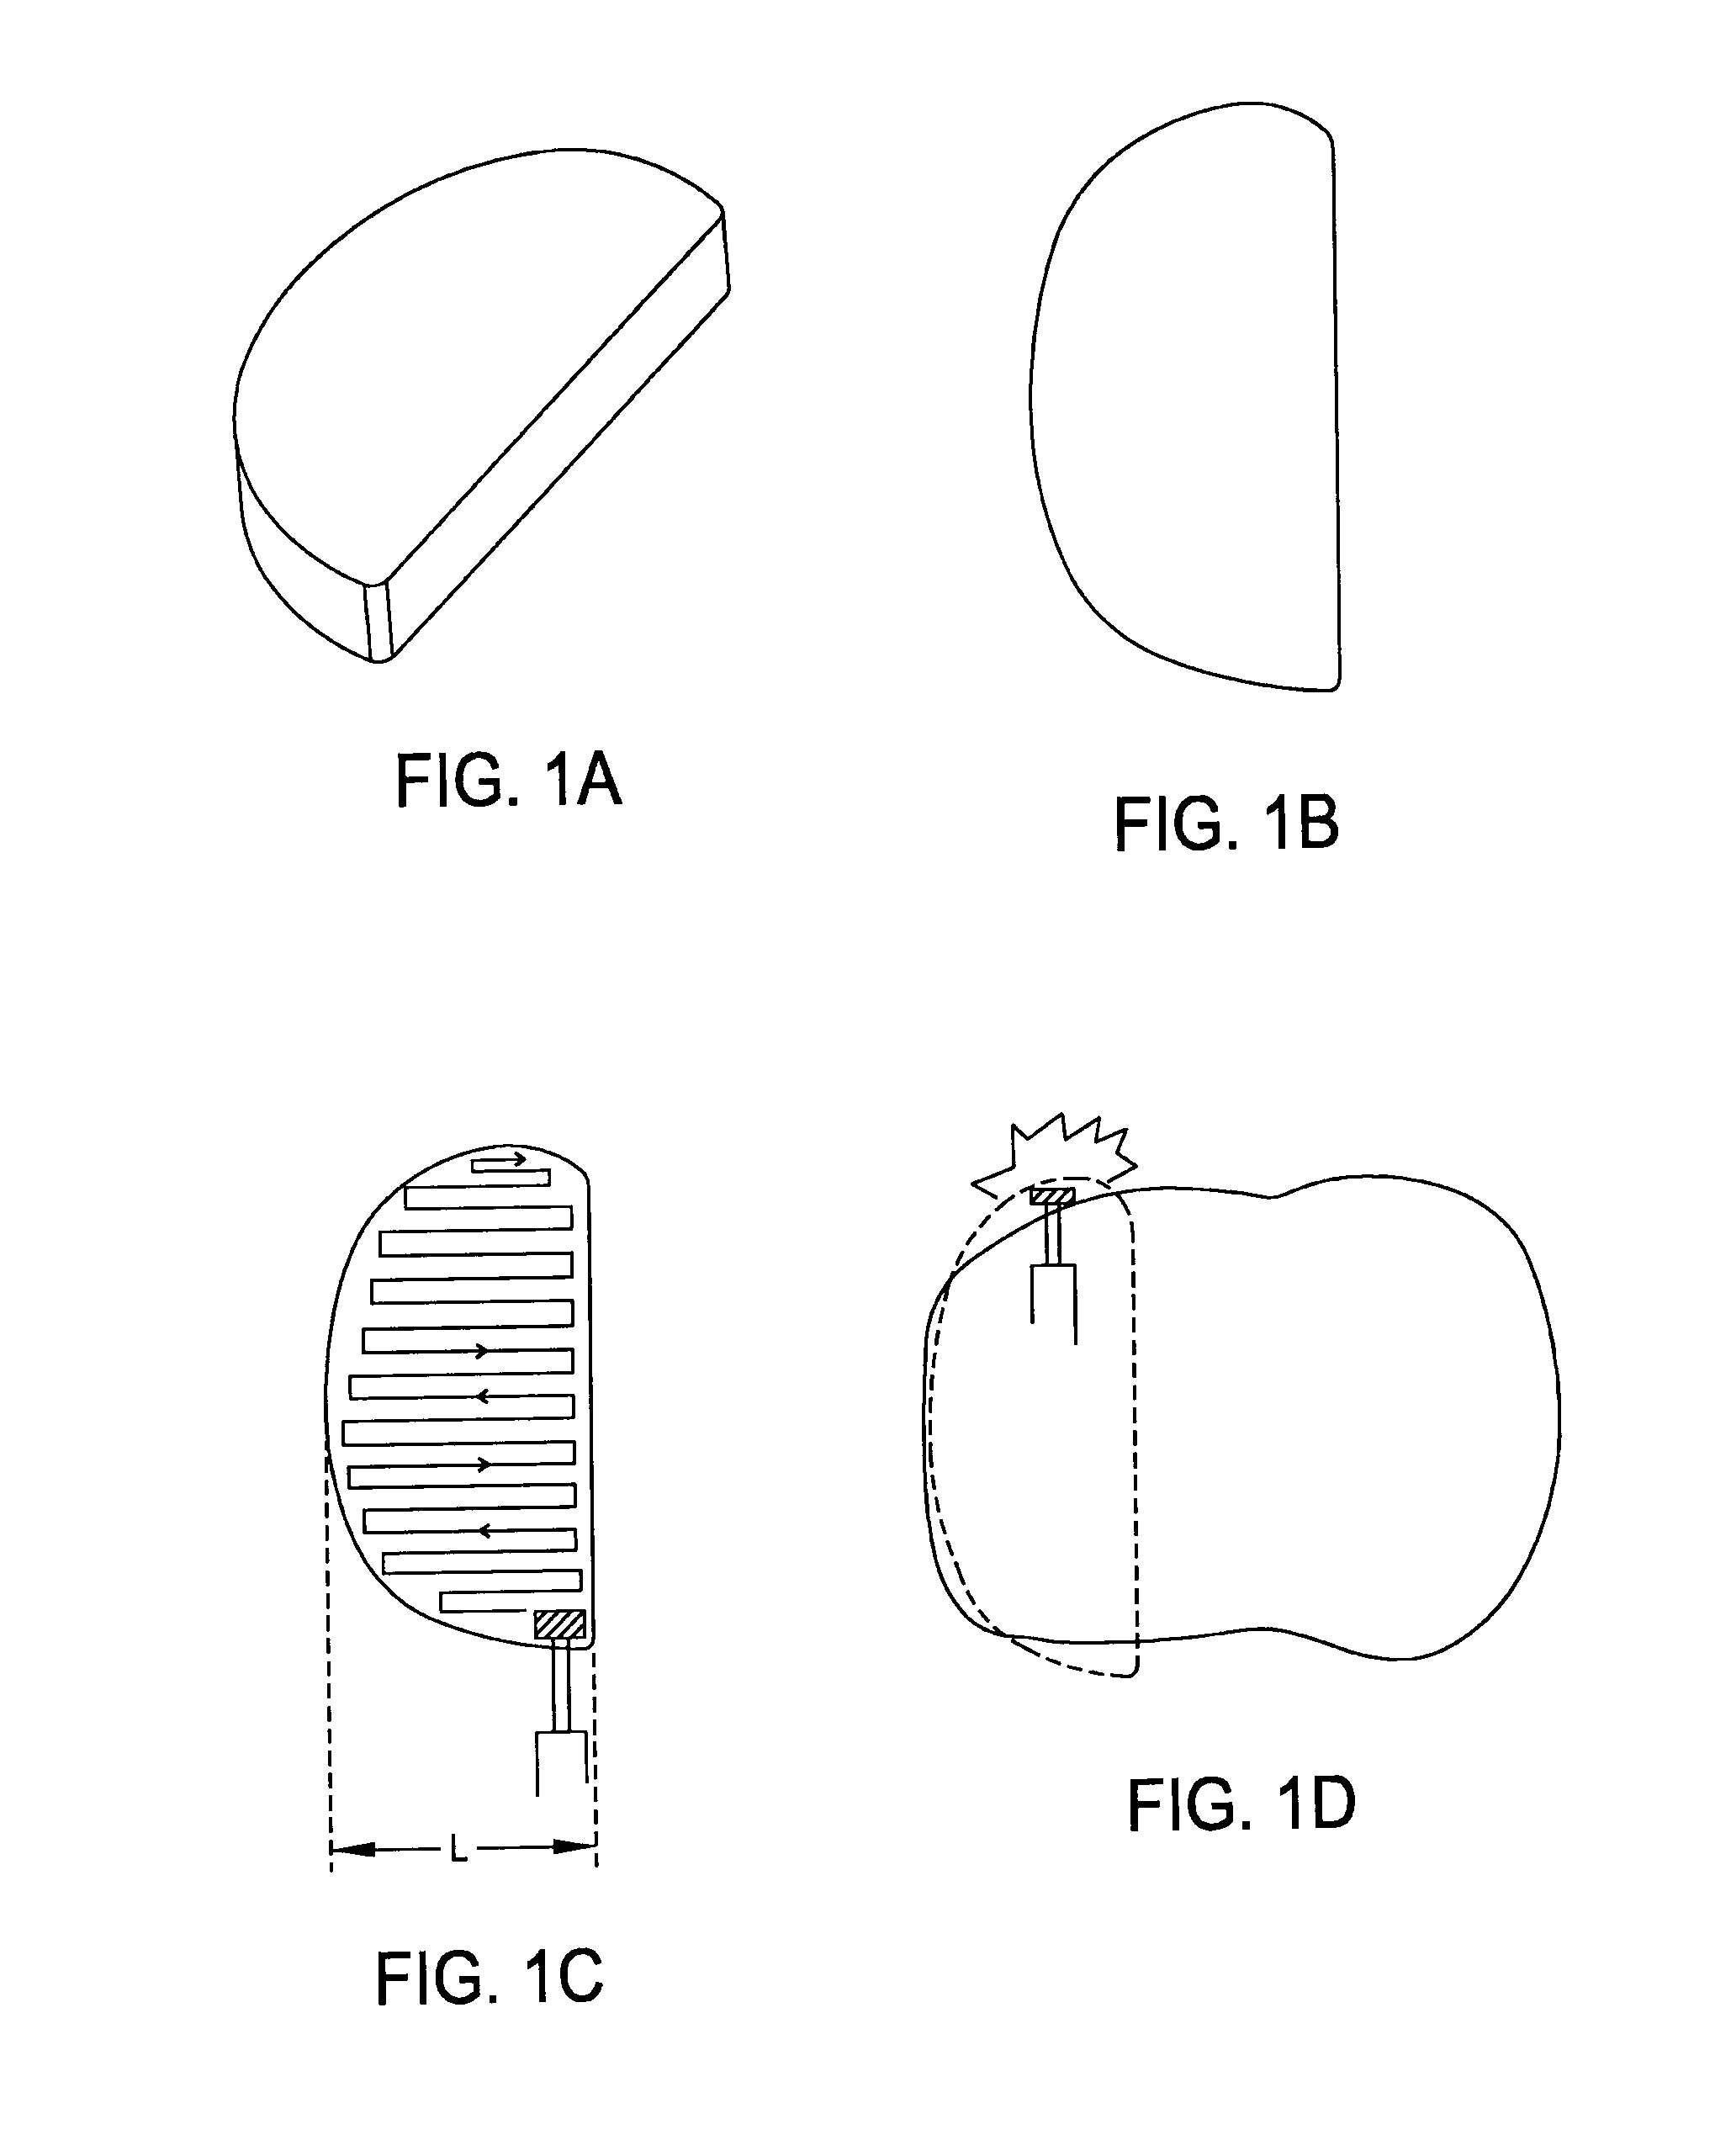 Method and apparatus for generating a tool path for a robotic orthopedic surgical procedure